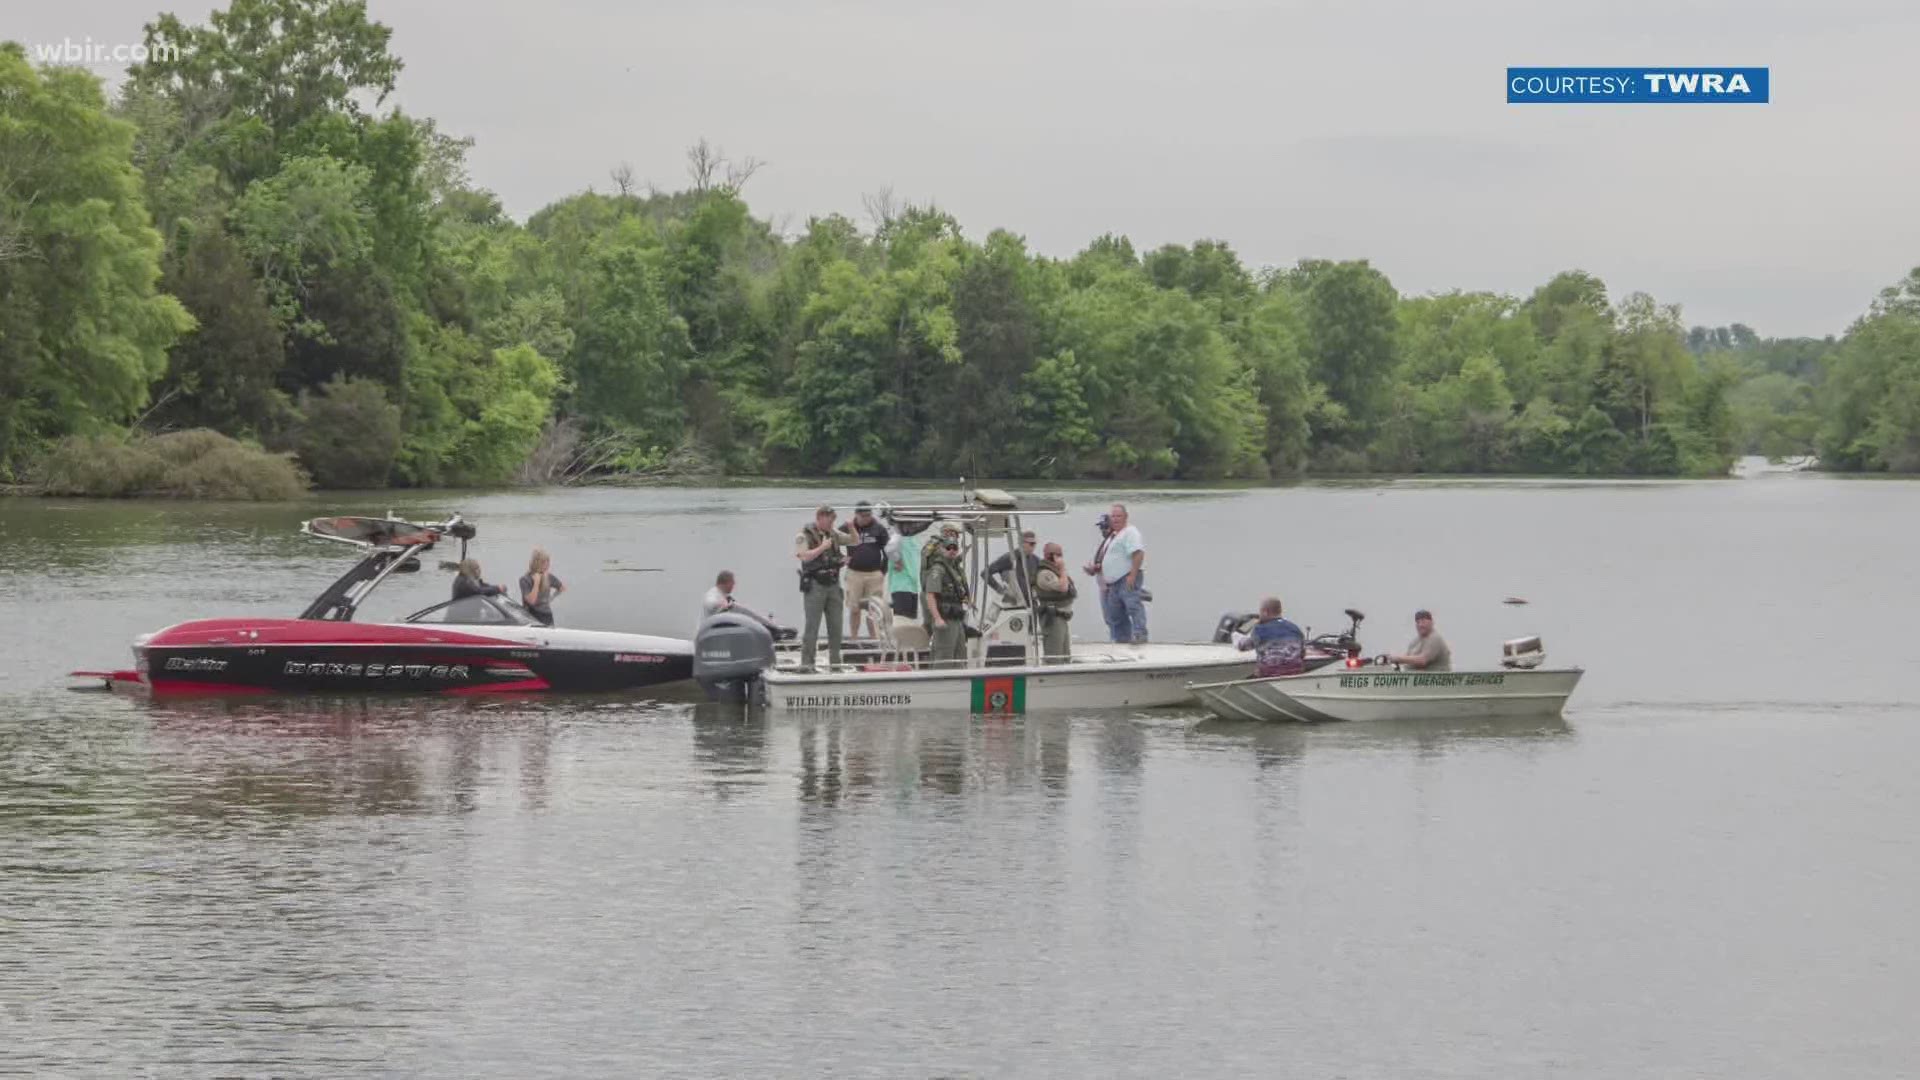 The TWRA said a second boater was able to swim to shore when it happened.